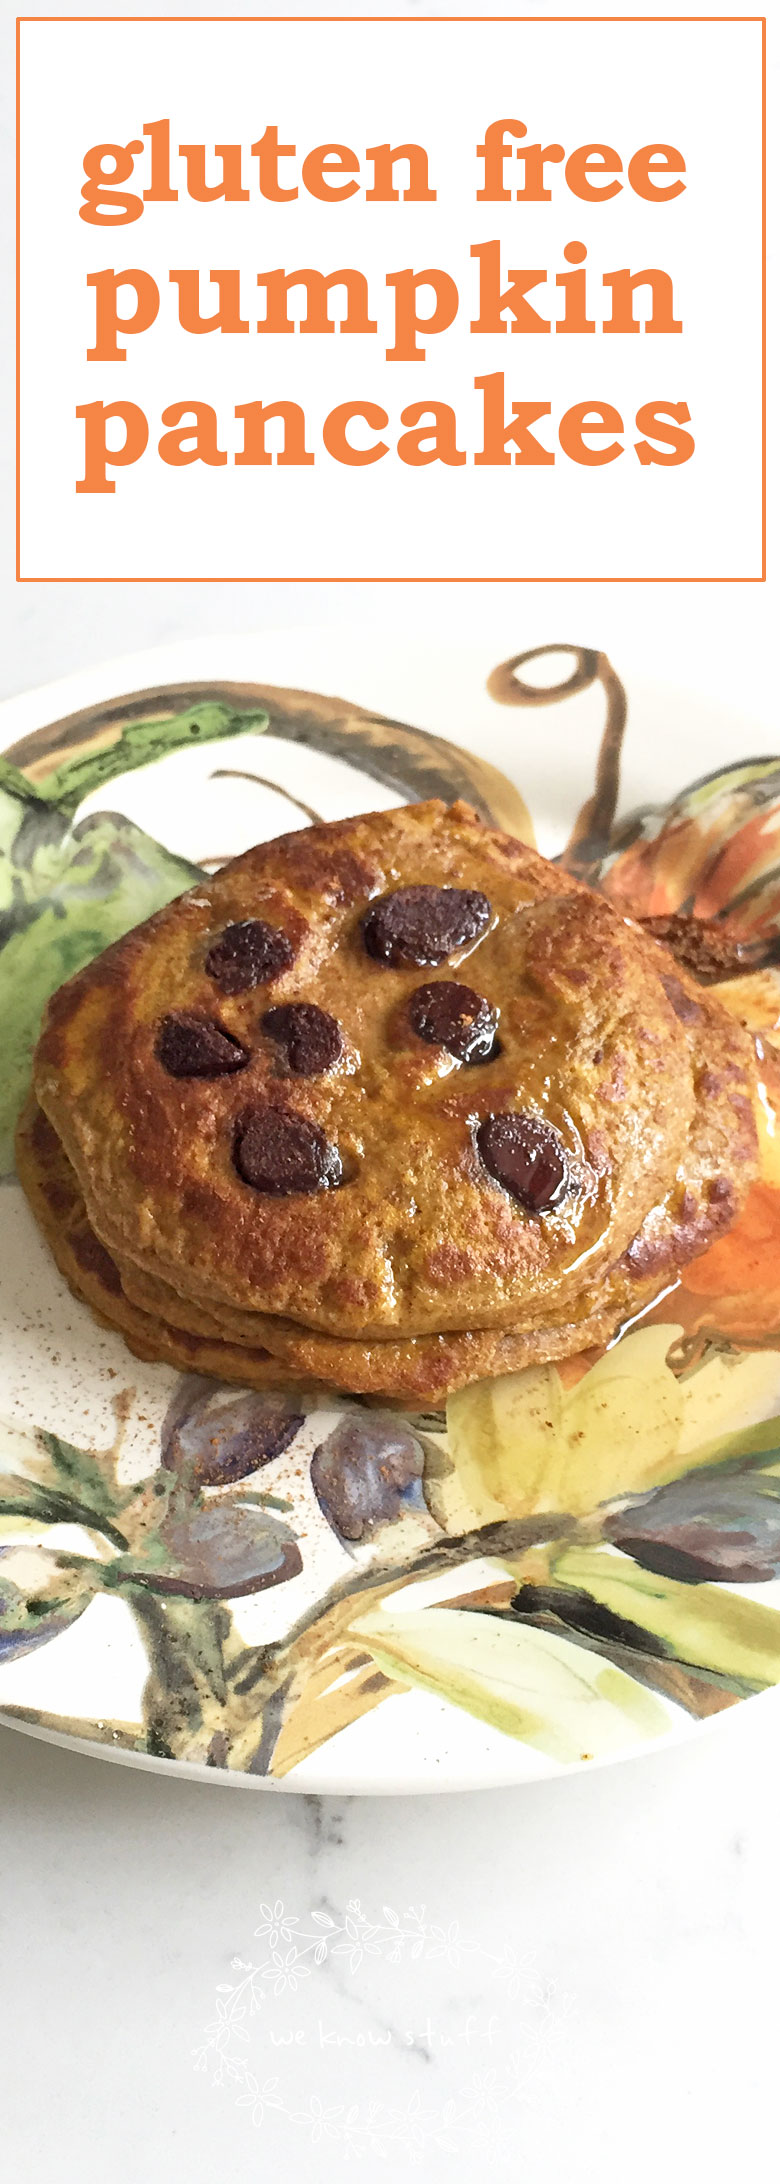 Fill your kid's up before school with our gluten free pancakes made with Coconut Flour and pumpkin!